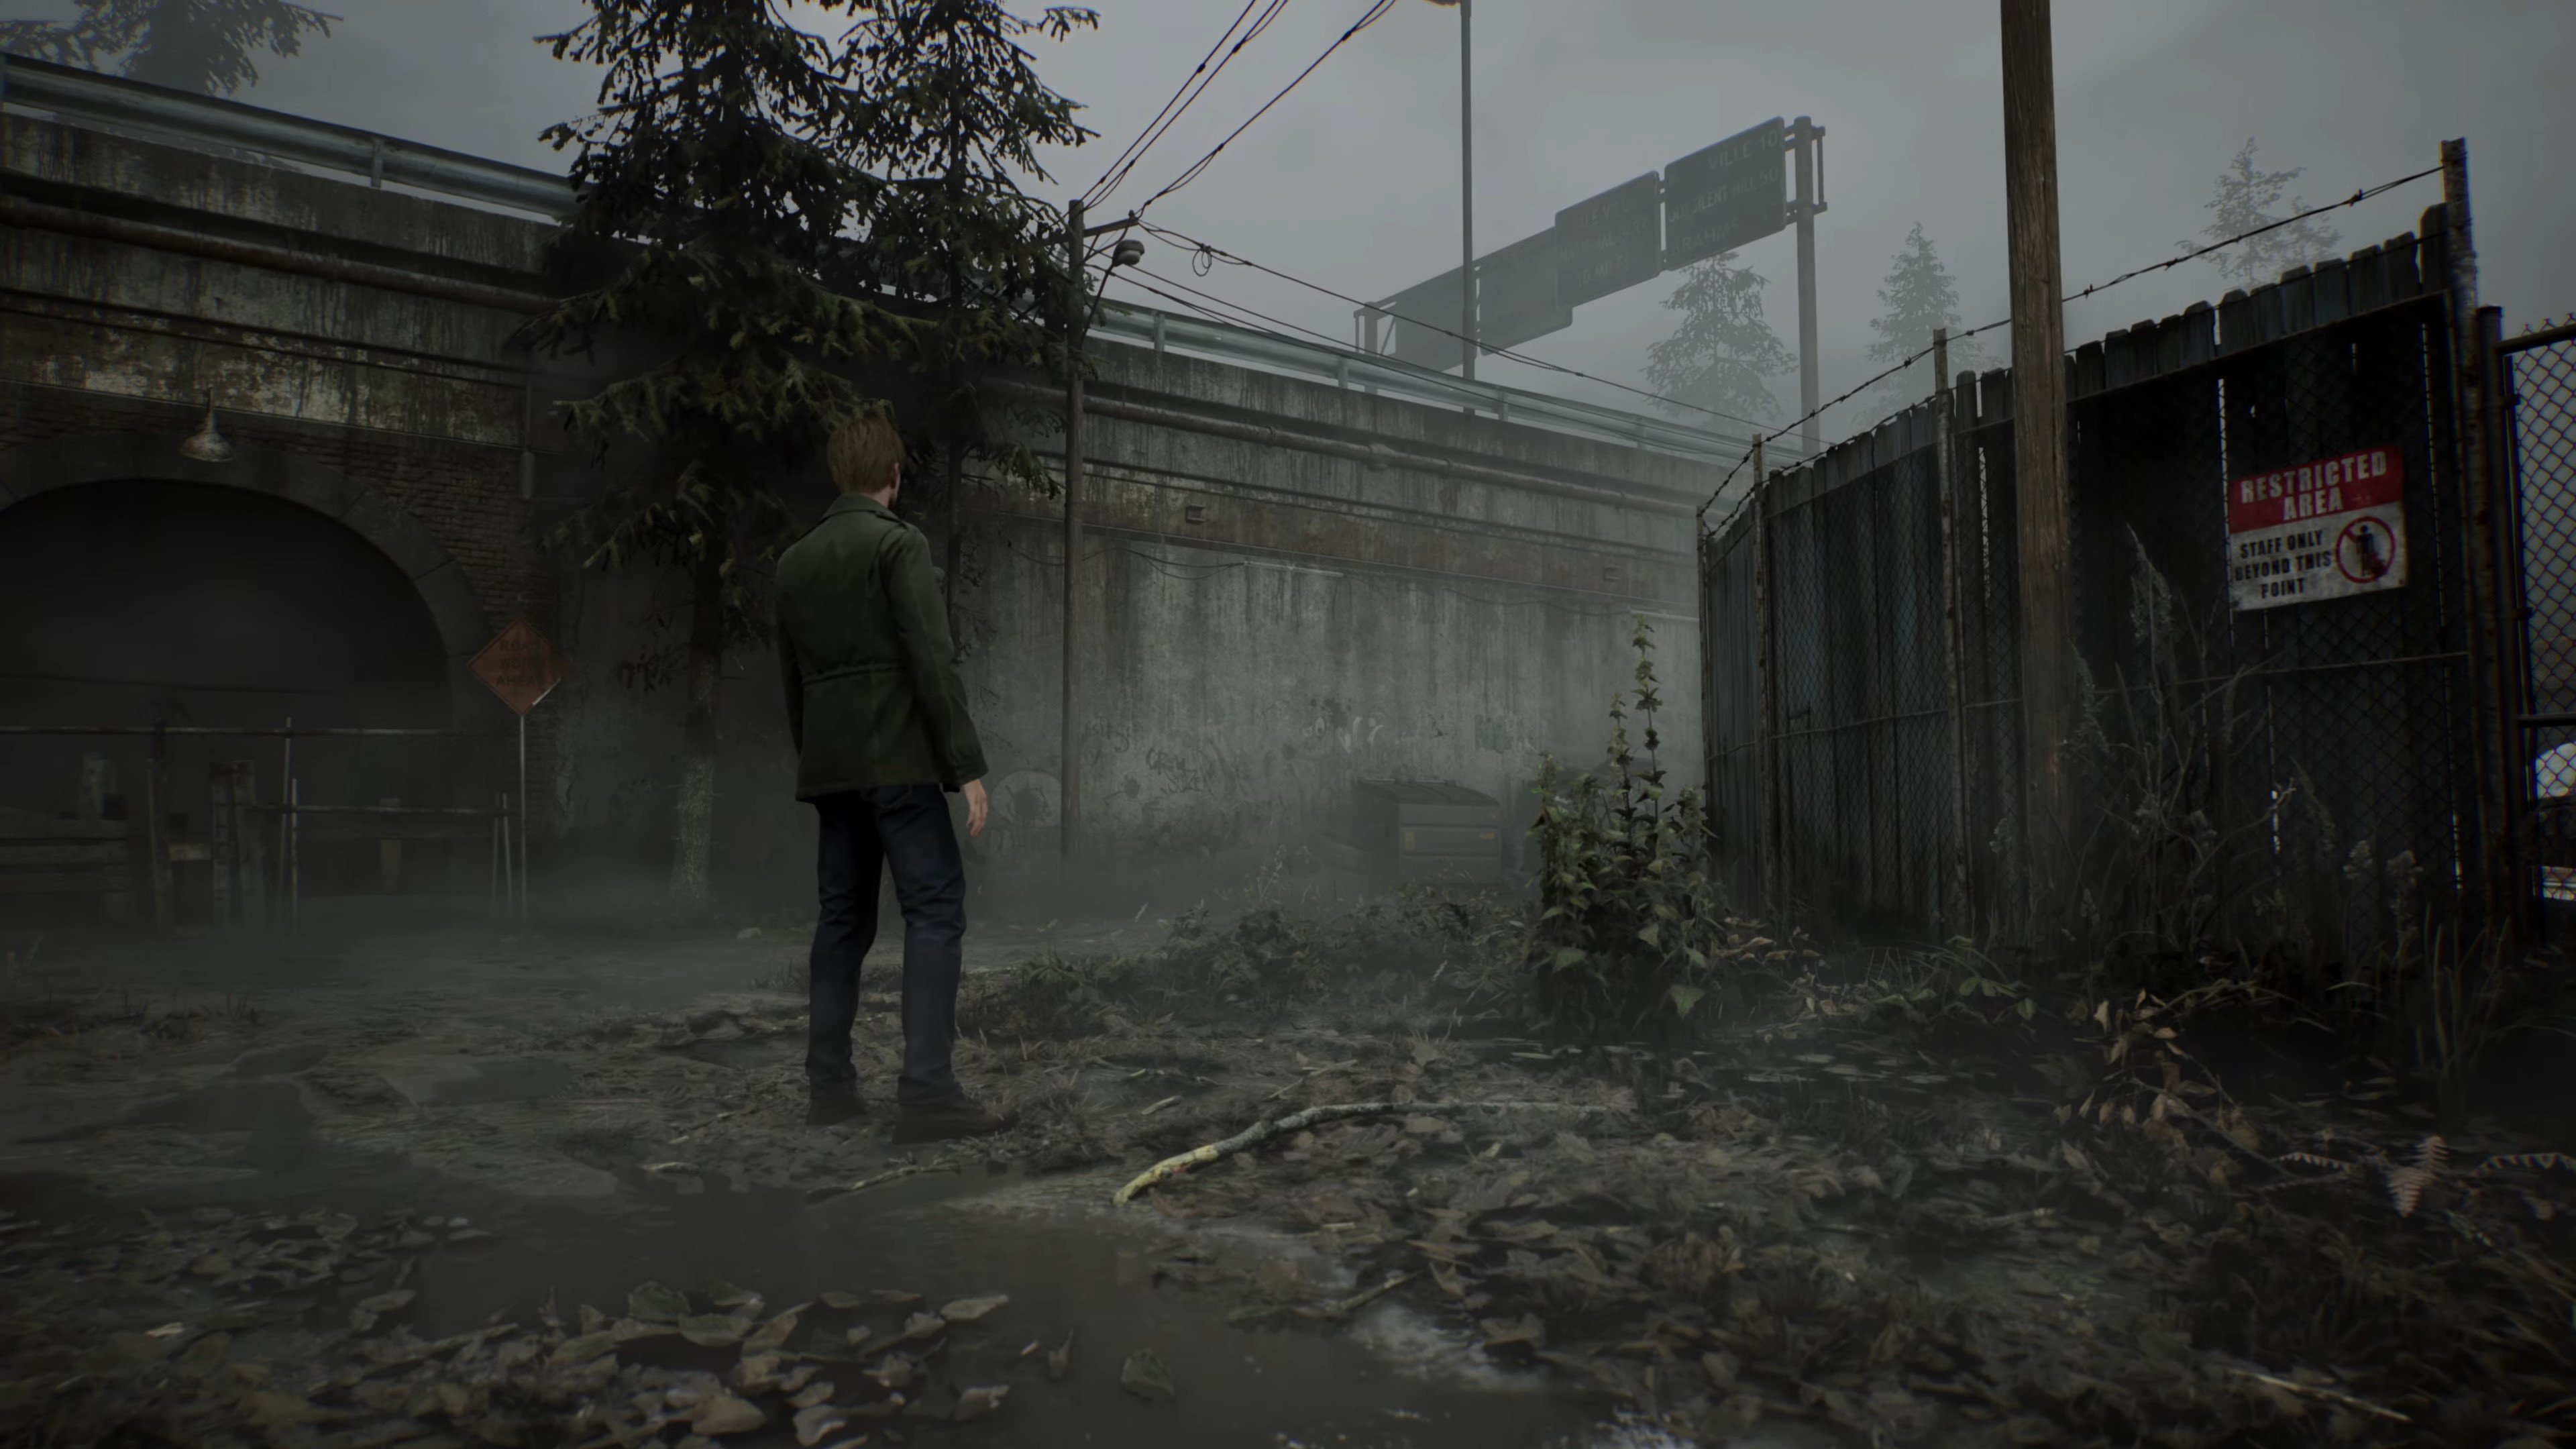 Konami shows extended gameplay footage of the Silent Hill 2 remake | VGC